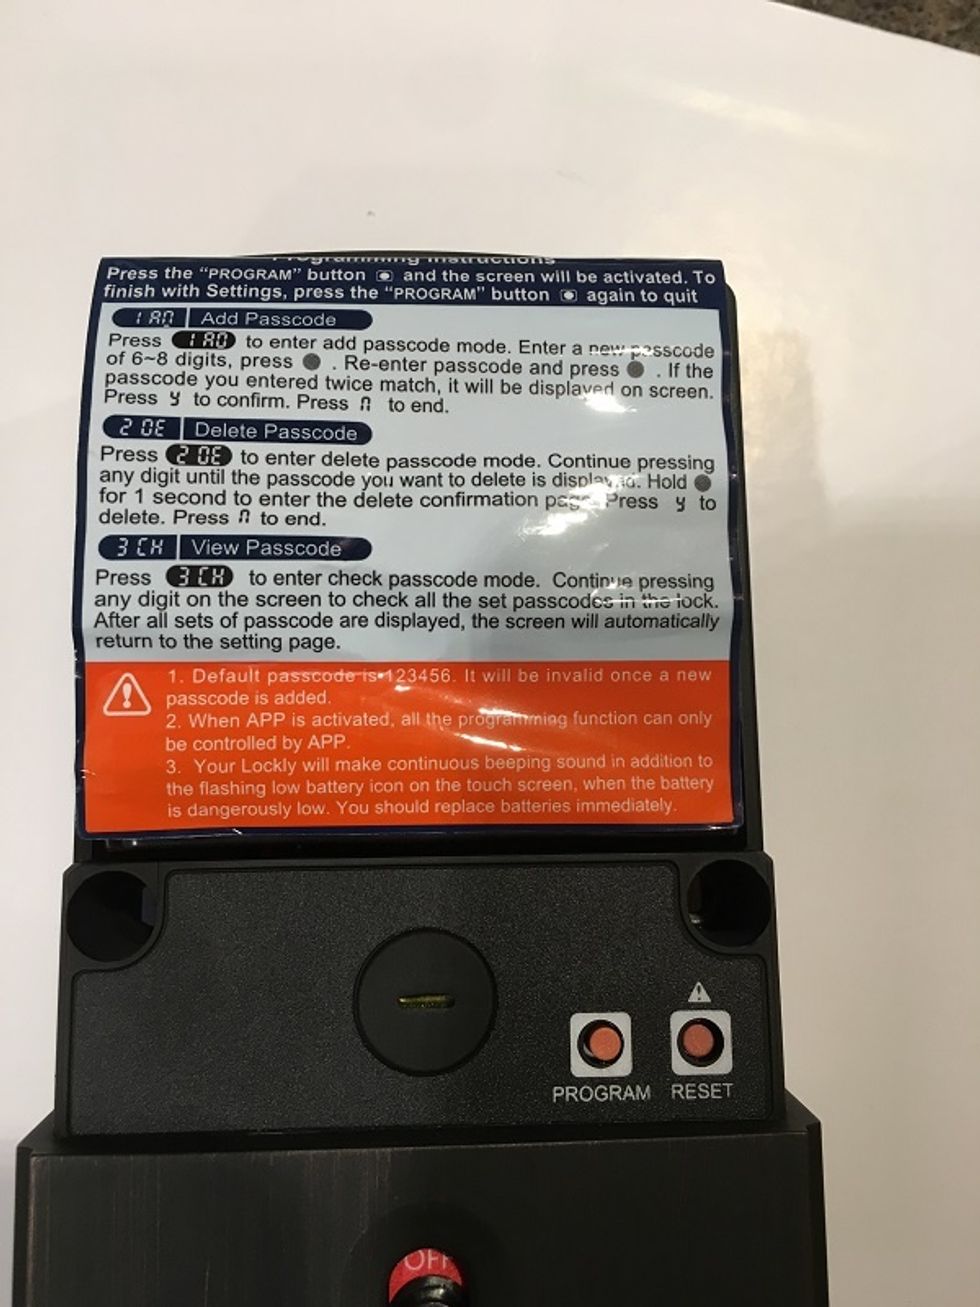 Photo of the programming instructions for lockly smart lock